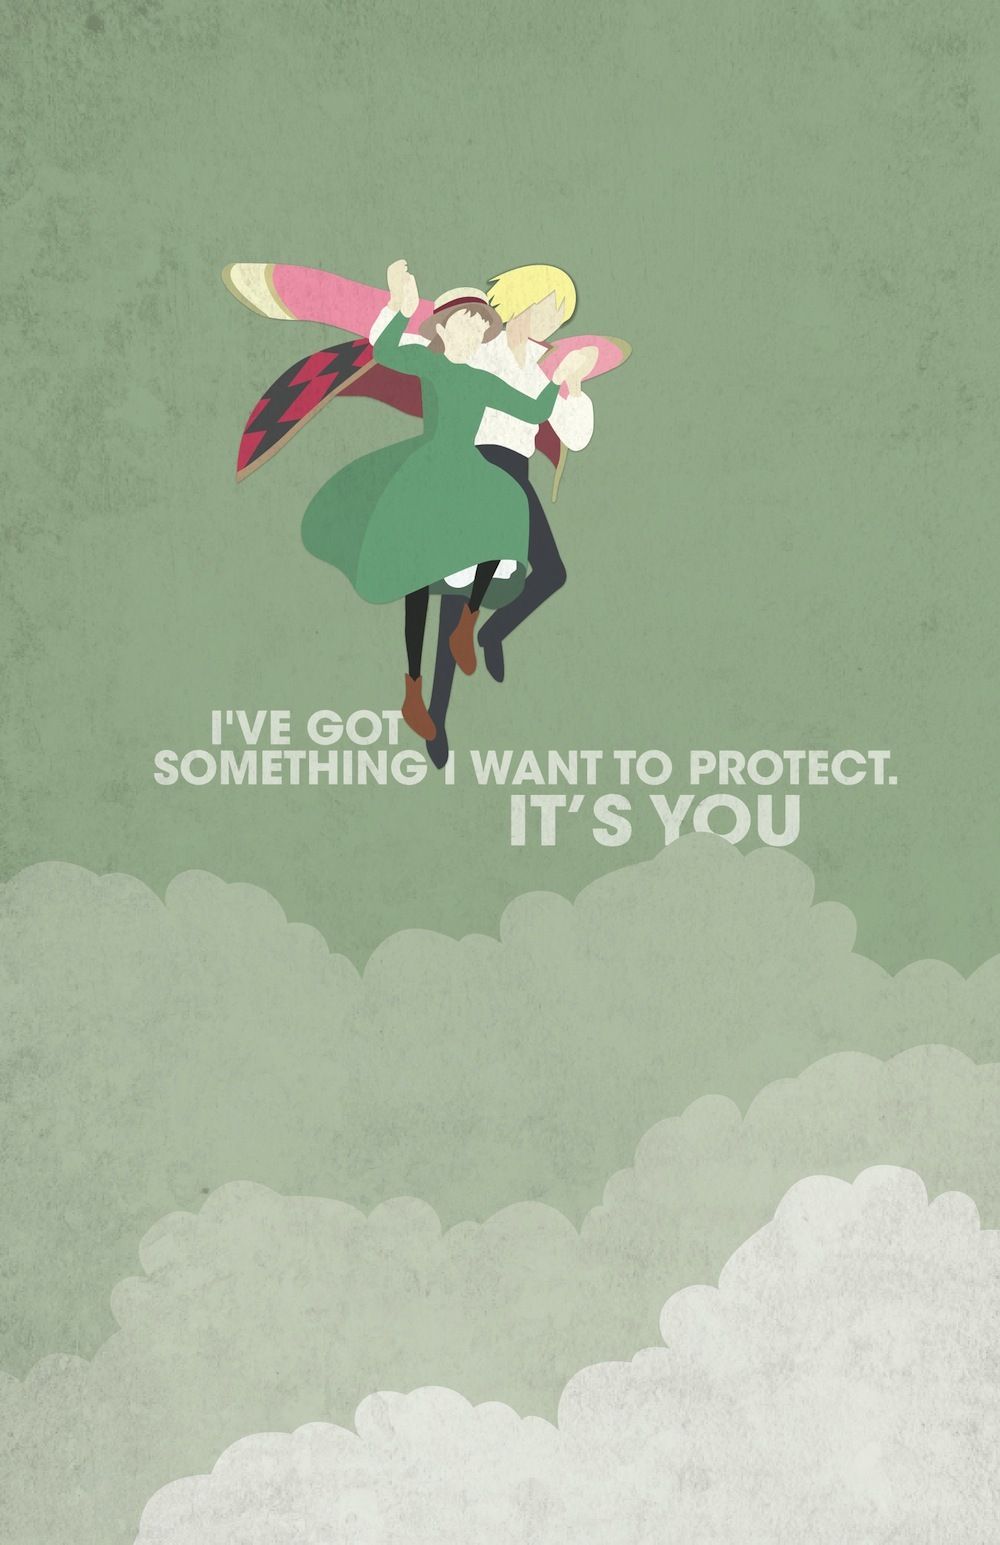 Howl's Moving Castle Famous Quotes - HD Wallpaper 